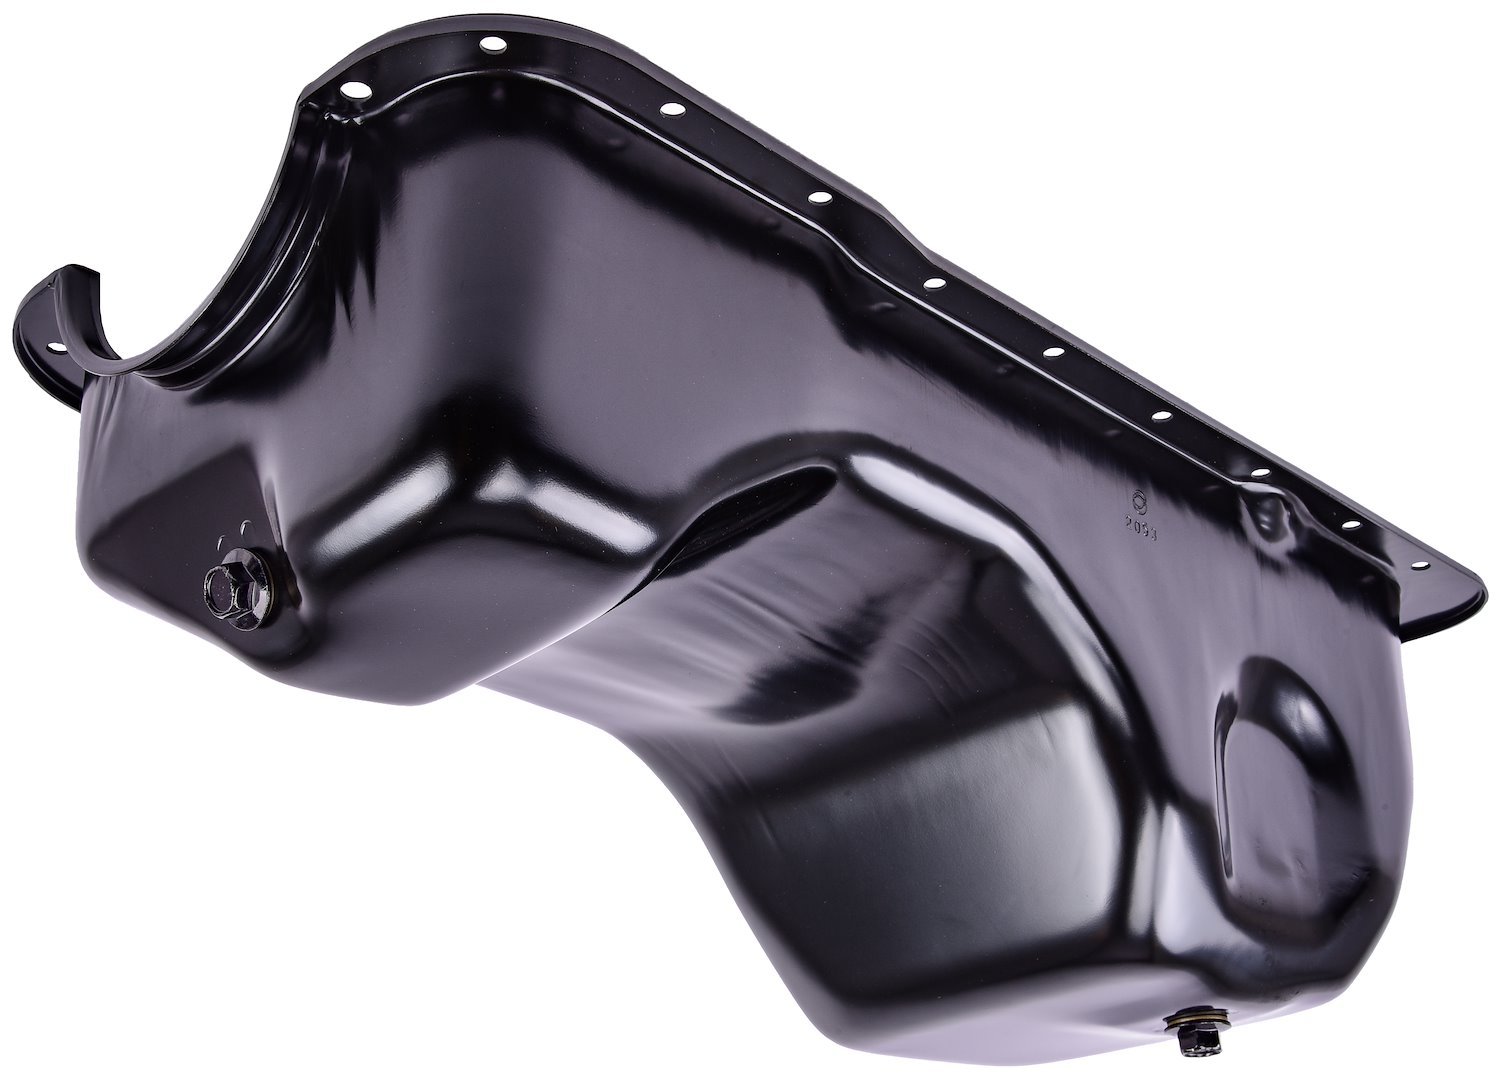 Stock-Style Replacement Oil Pan for 1979-1995 Ford Mustang 5.0L without Low Oil Level Sensor Port [Black]